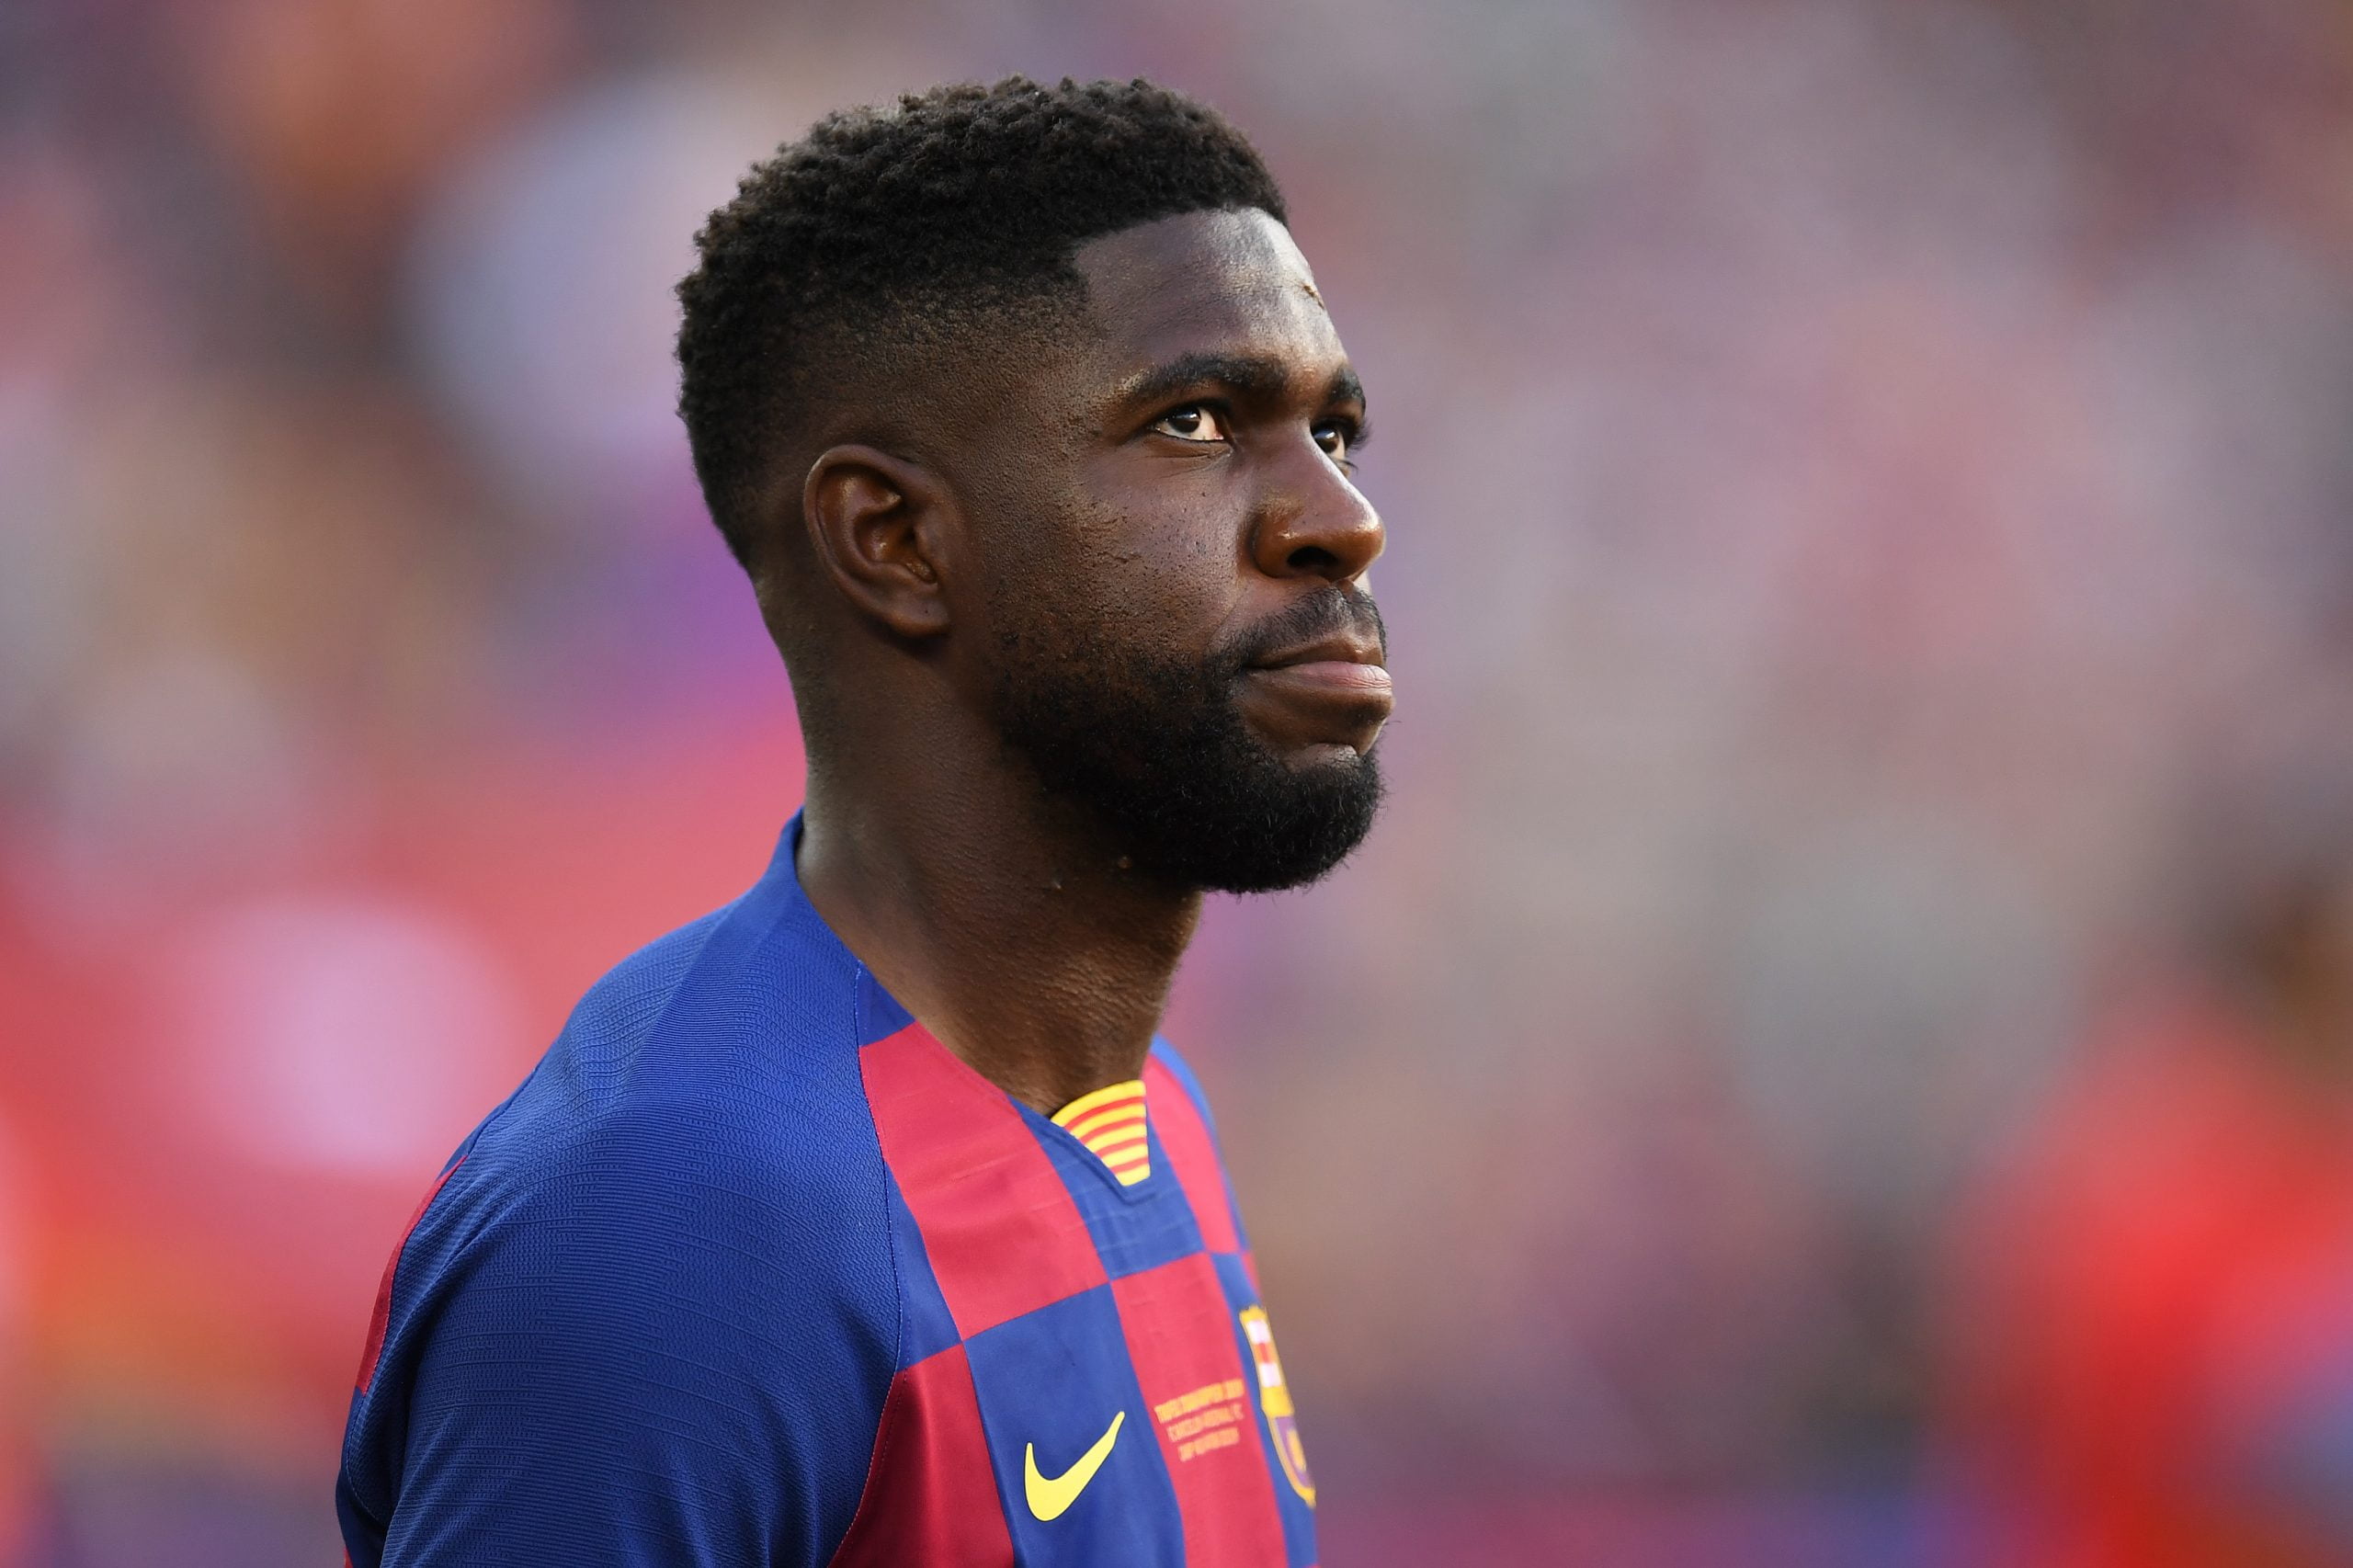 BARCELONA, SPAIN - AUGUST 04: Samuel Umtiti of FC Barcelona looks on prior to the Joan Gamper trophy friendly match between FC Barcelona and Arsenal at Nou Camp on August 04, 2019 in Barcelona, Spain. (Photo by David Ramos/Getty Images)